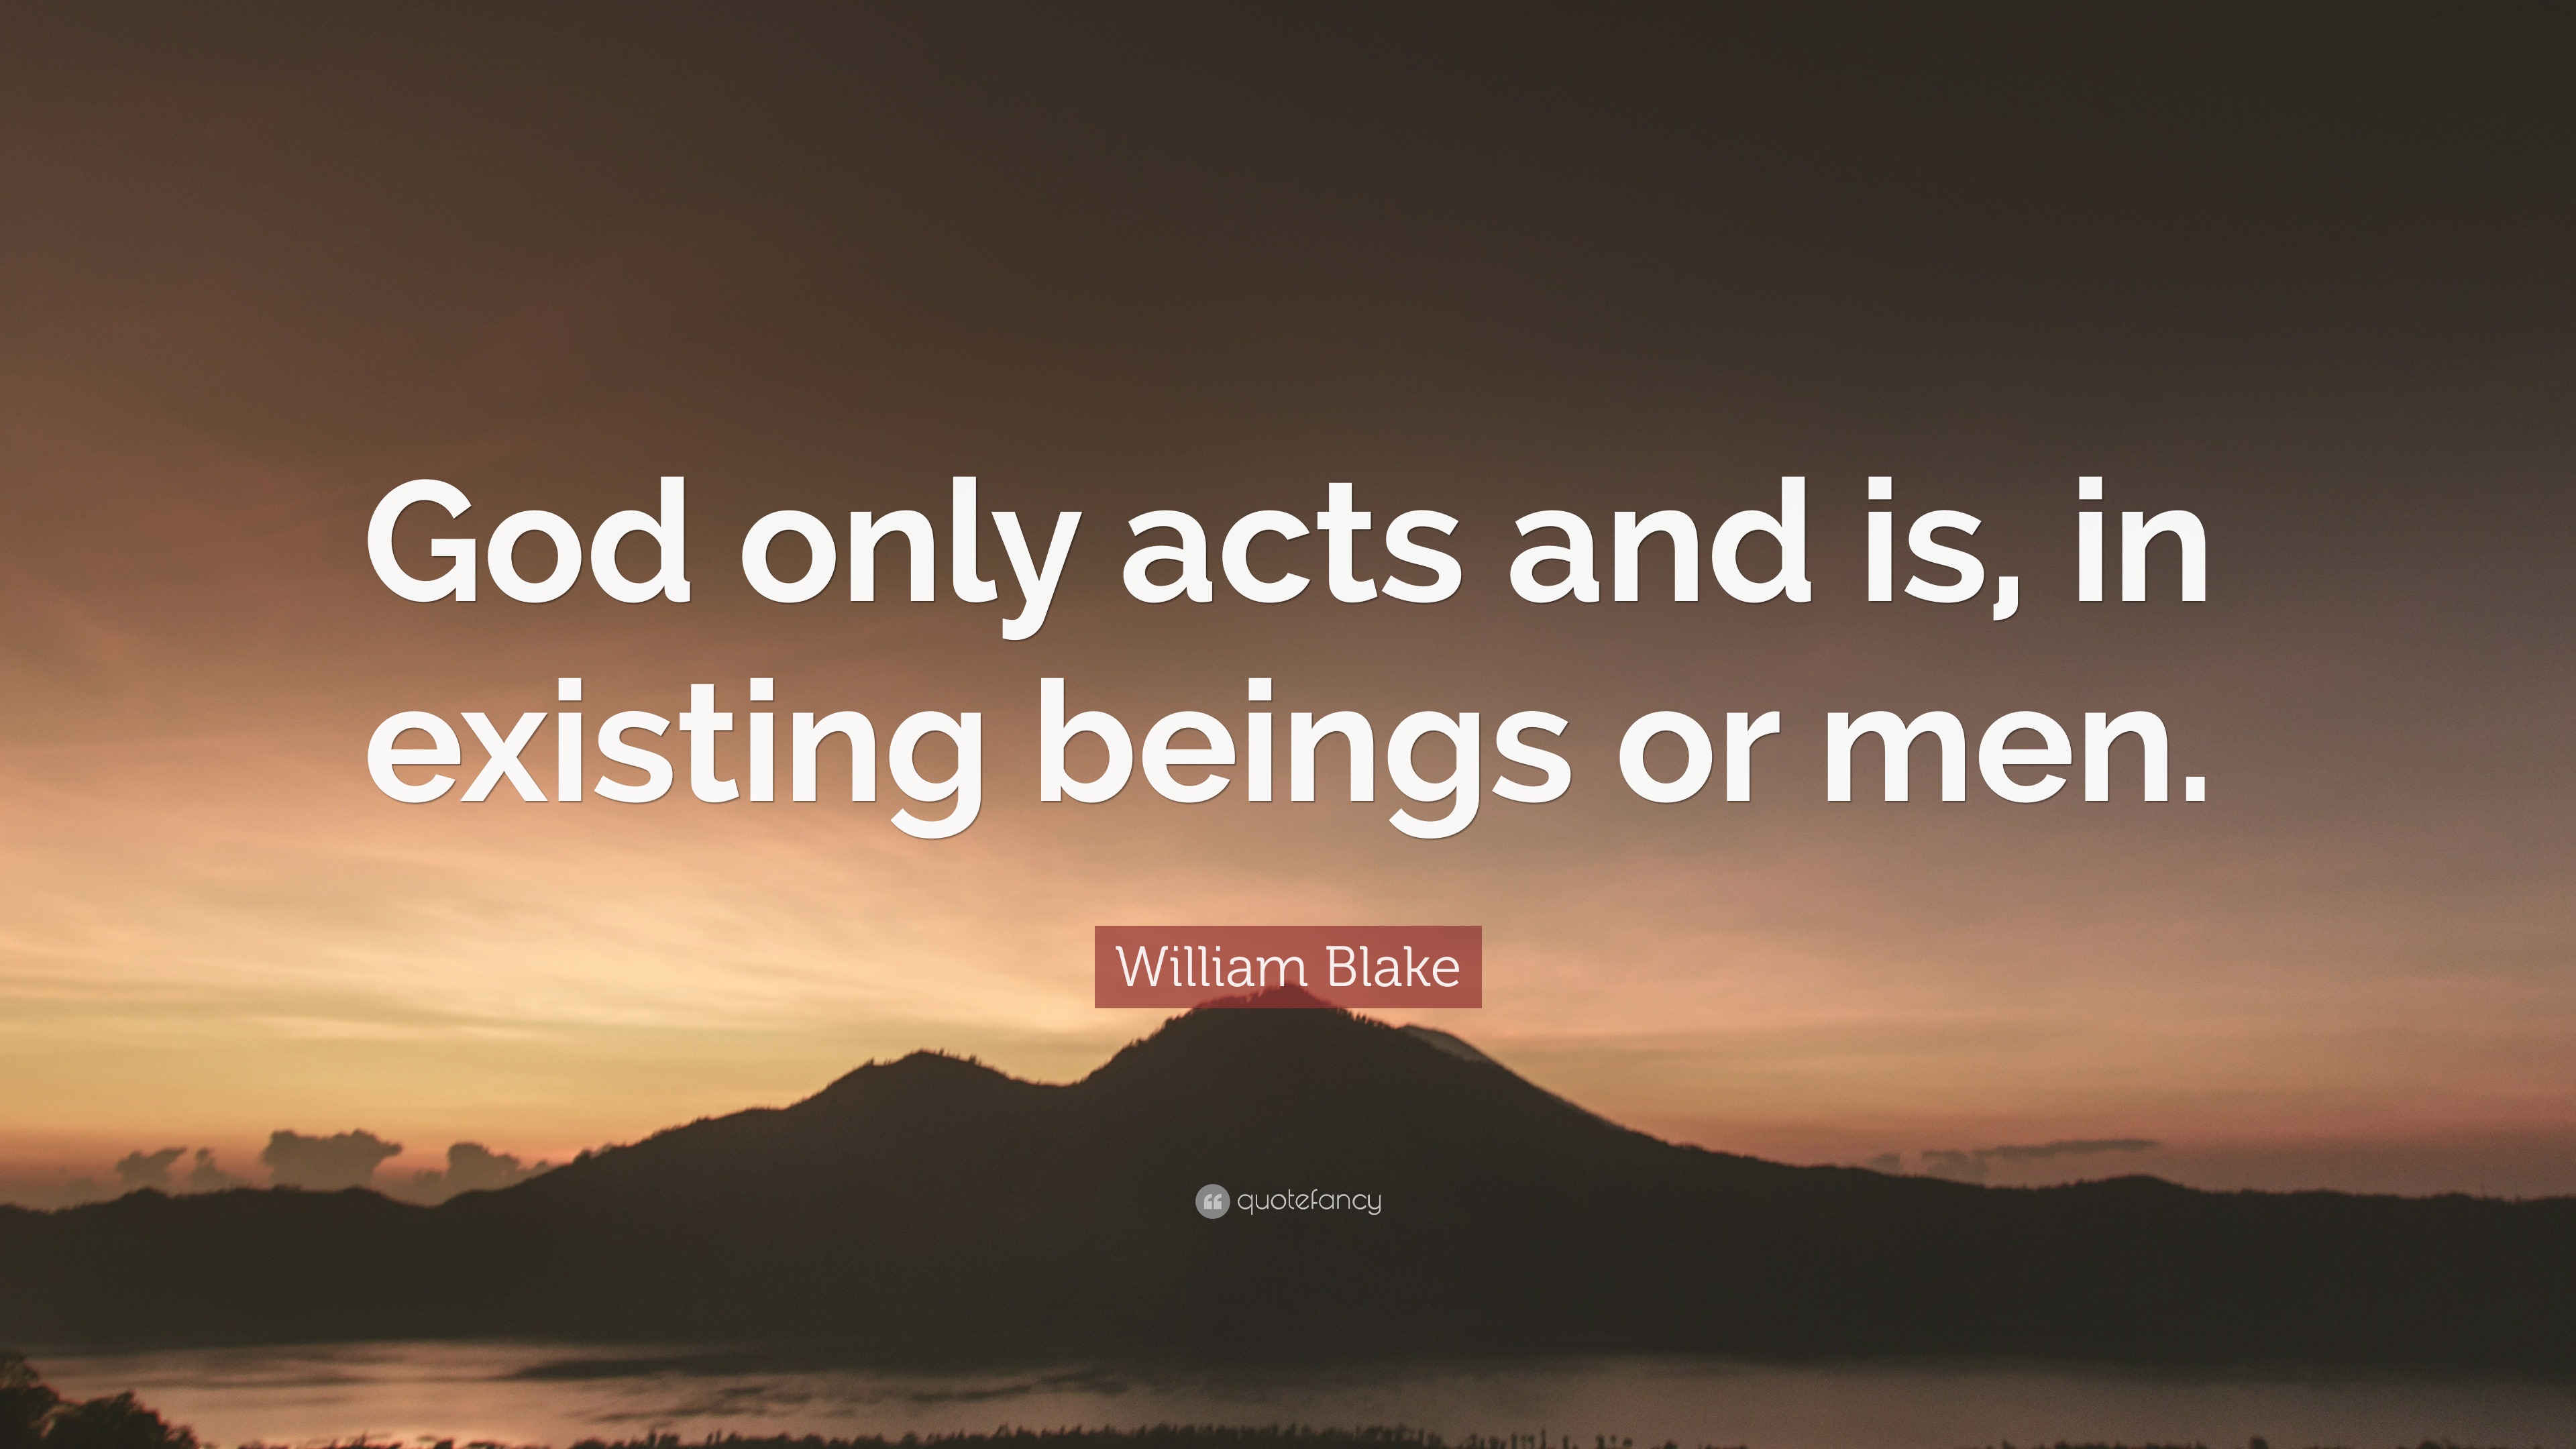 William Blake Quote: “God only acts and is, in existing beings or men.”